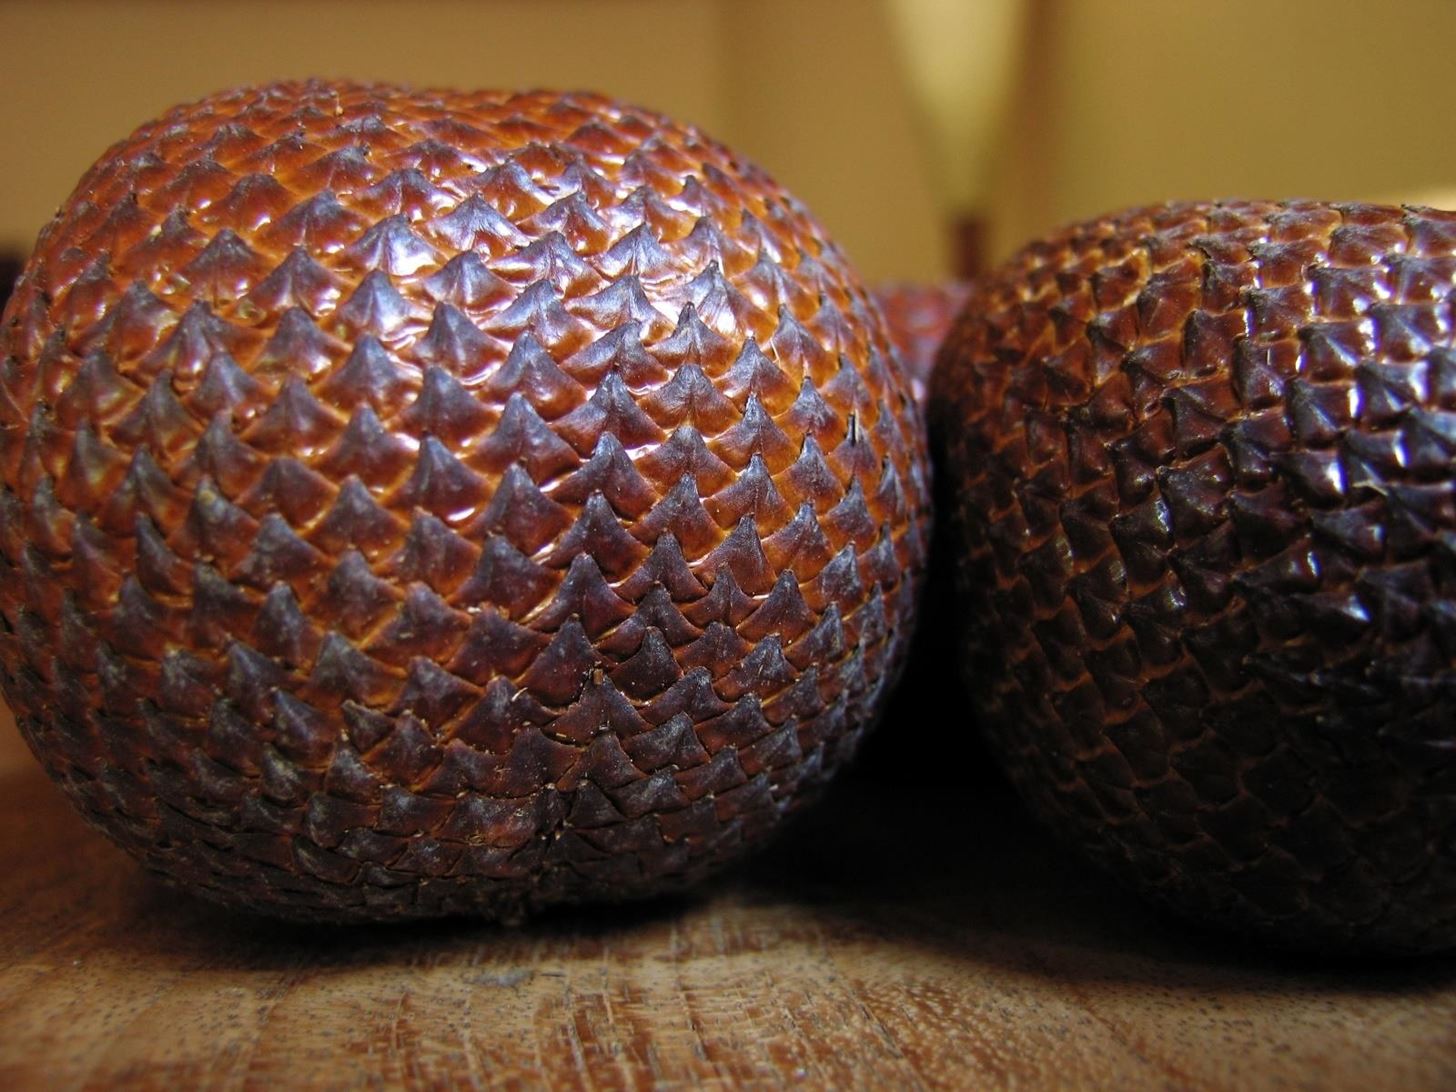 Weird Ingredient Wednesday: Salak (A Fruit Slytherins Would Love)